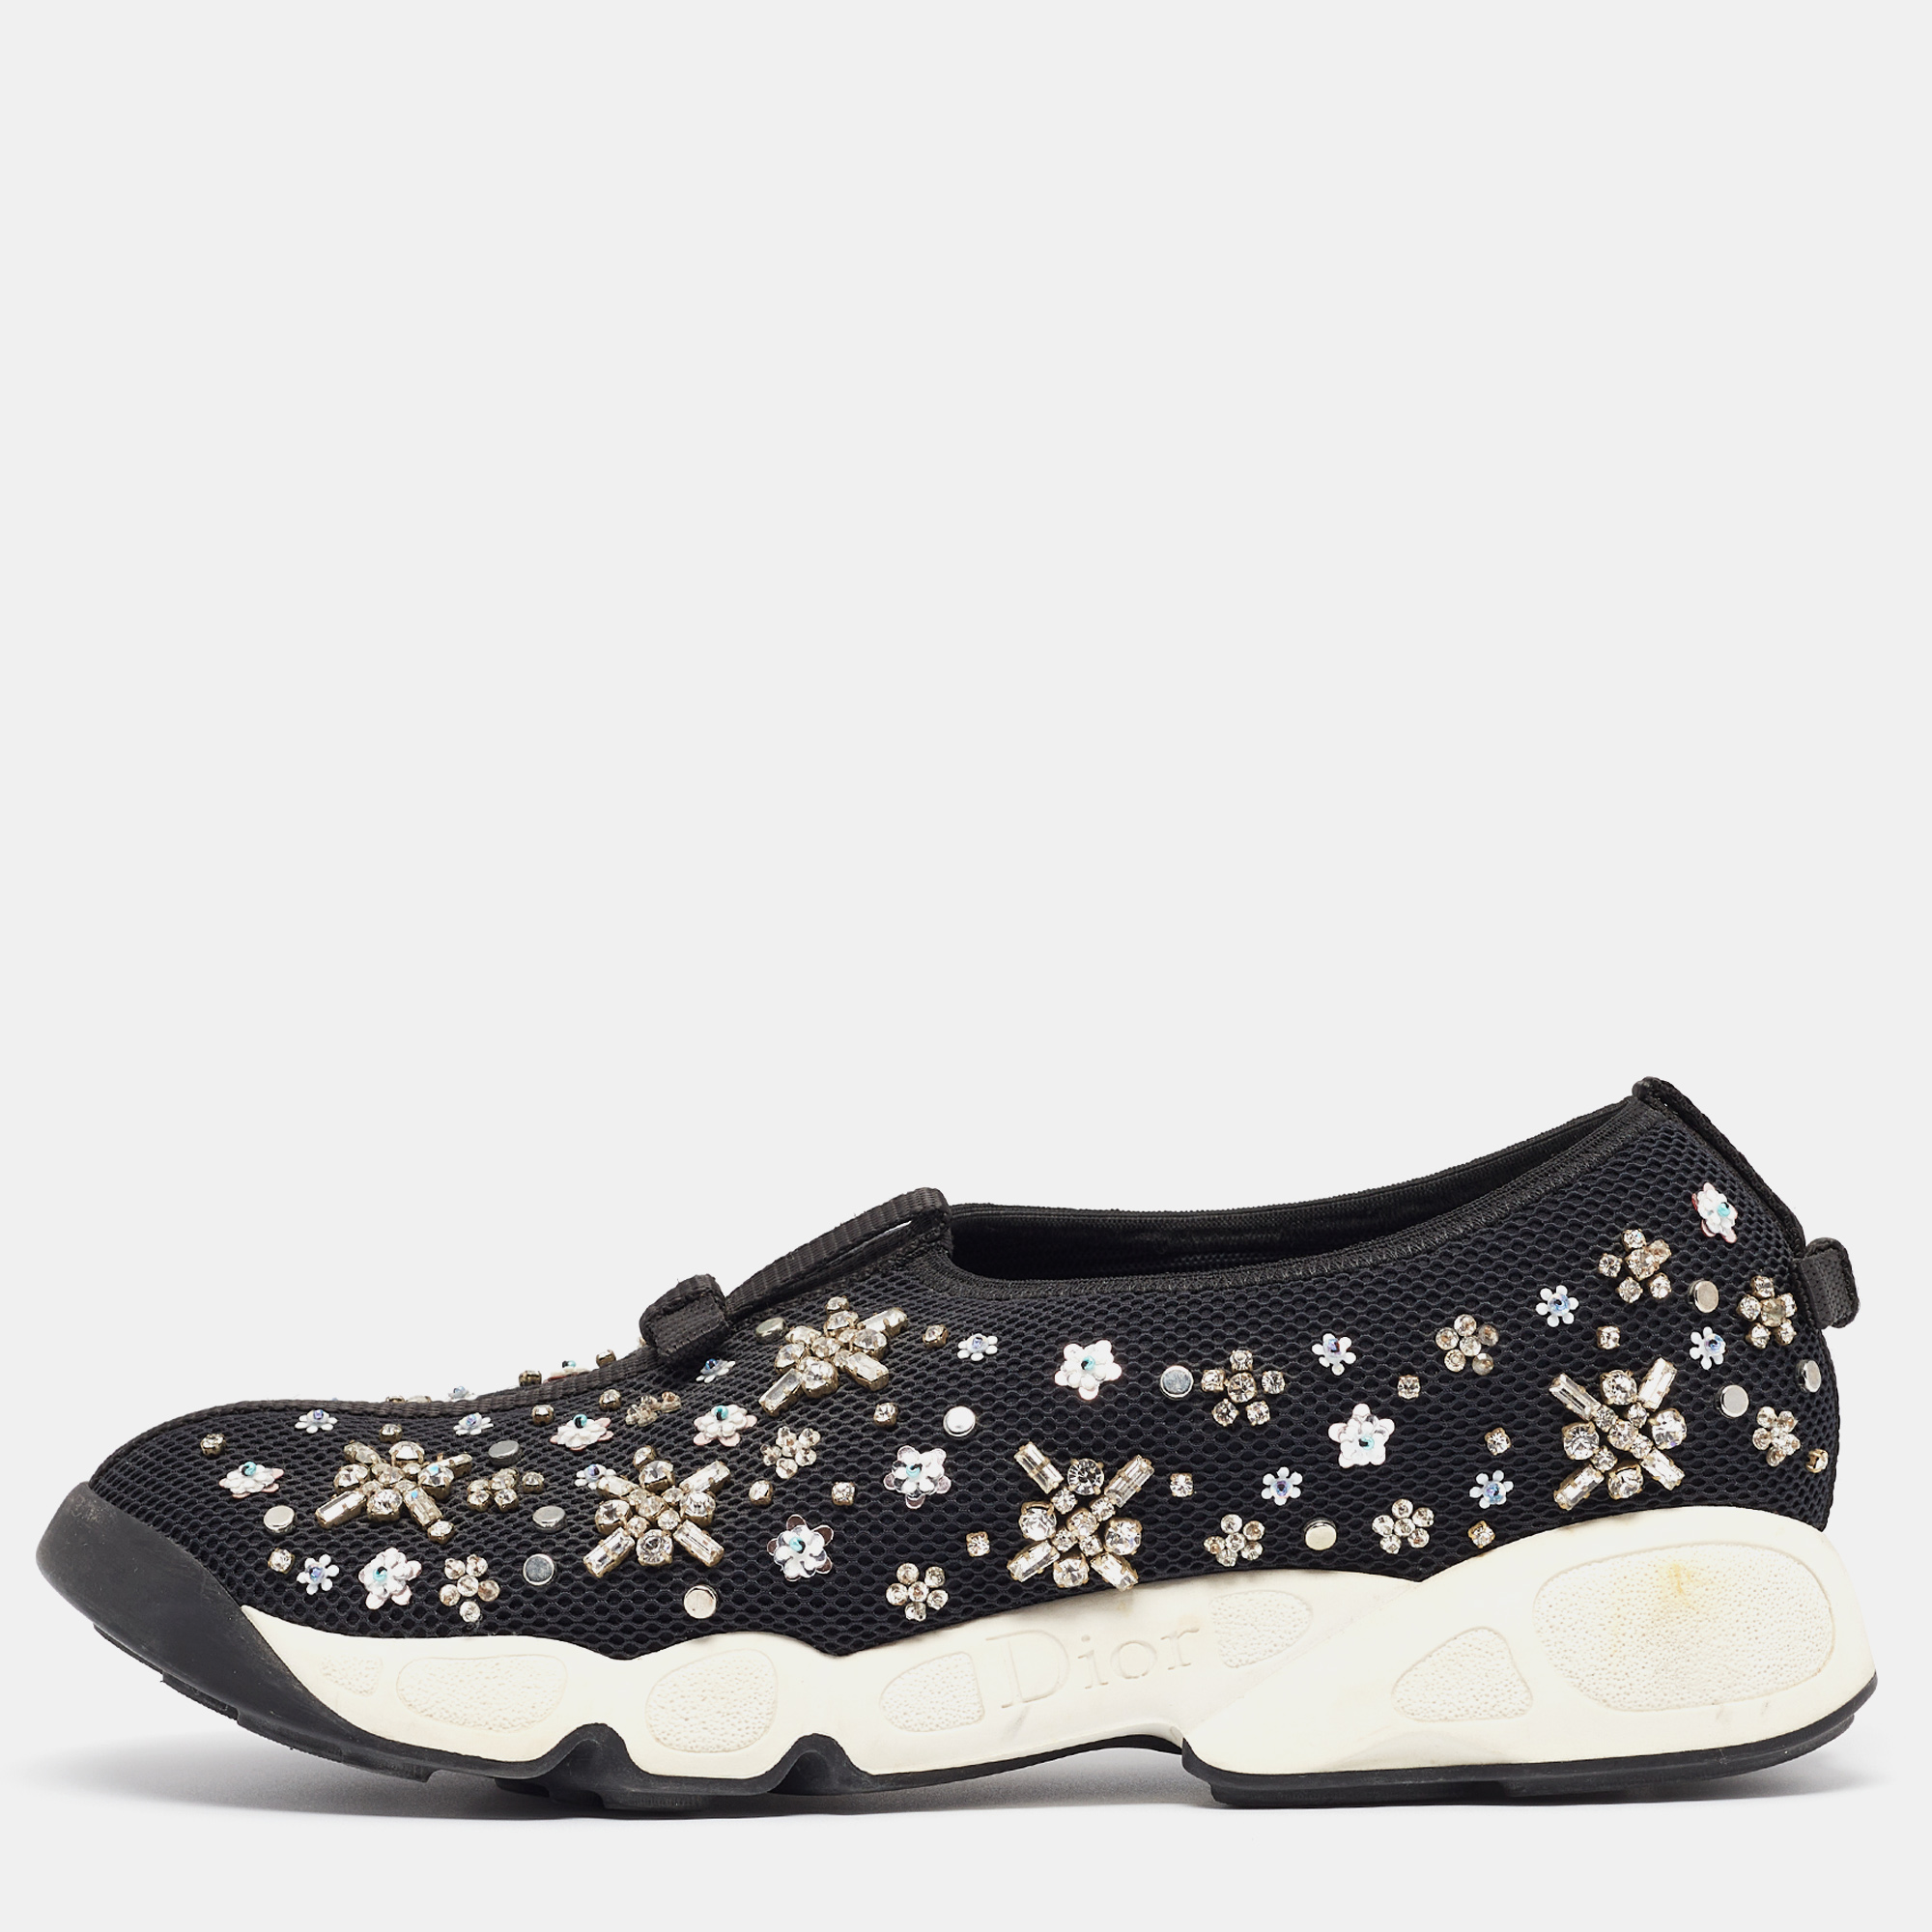 These Dior Fusion sneakers has the perfect amalgamation of a striking appeal and practical ease. Created beautifully from black mesh it is decorated with attractive embellishments and flaunts the brand signature on the side. The leather insoles and rubber soles makes sure these shoes ensures relaxed movement.